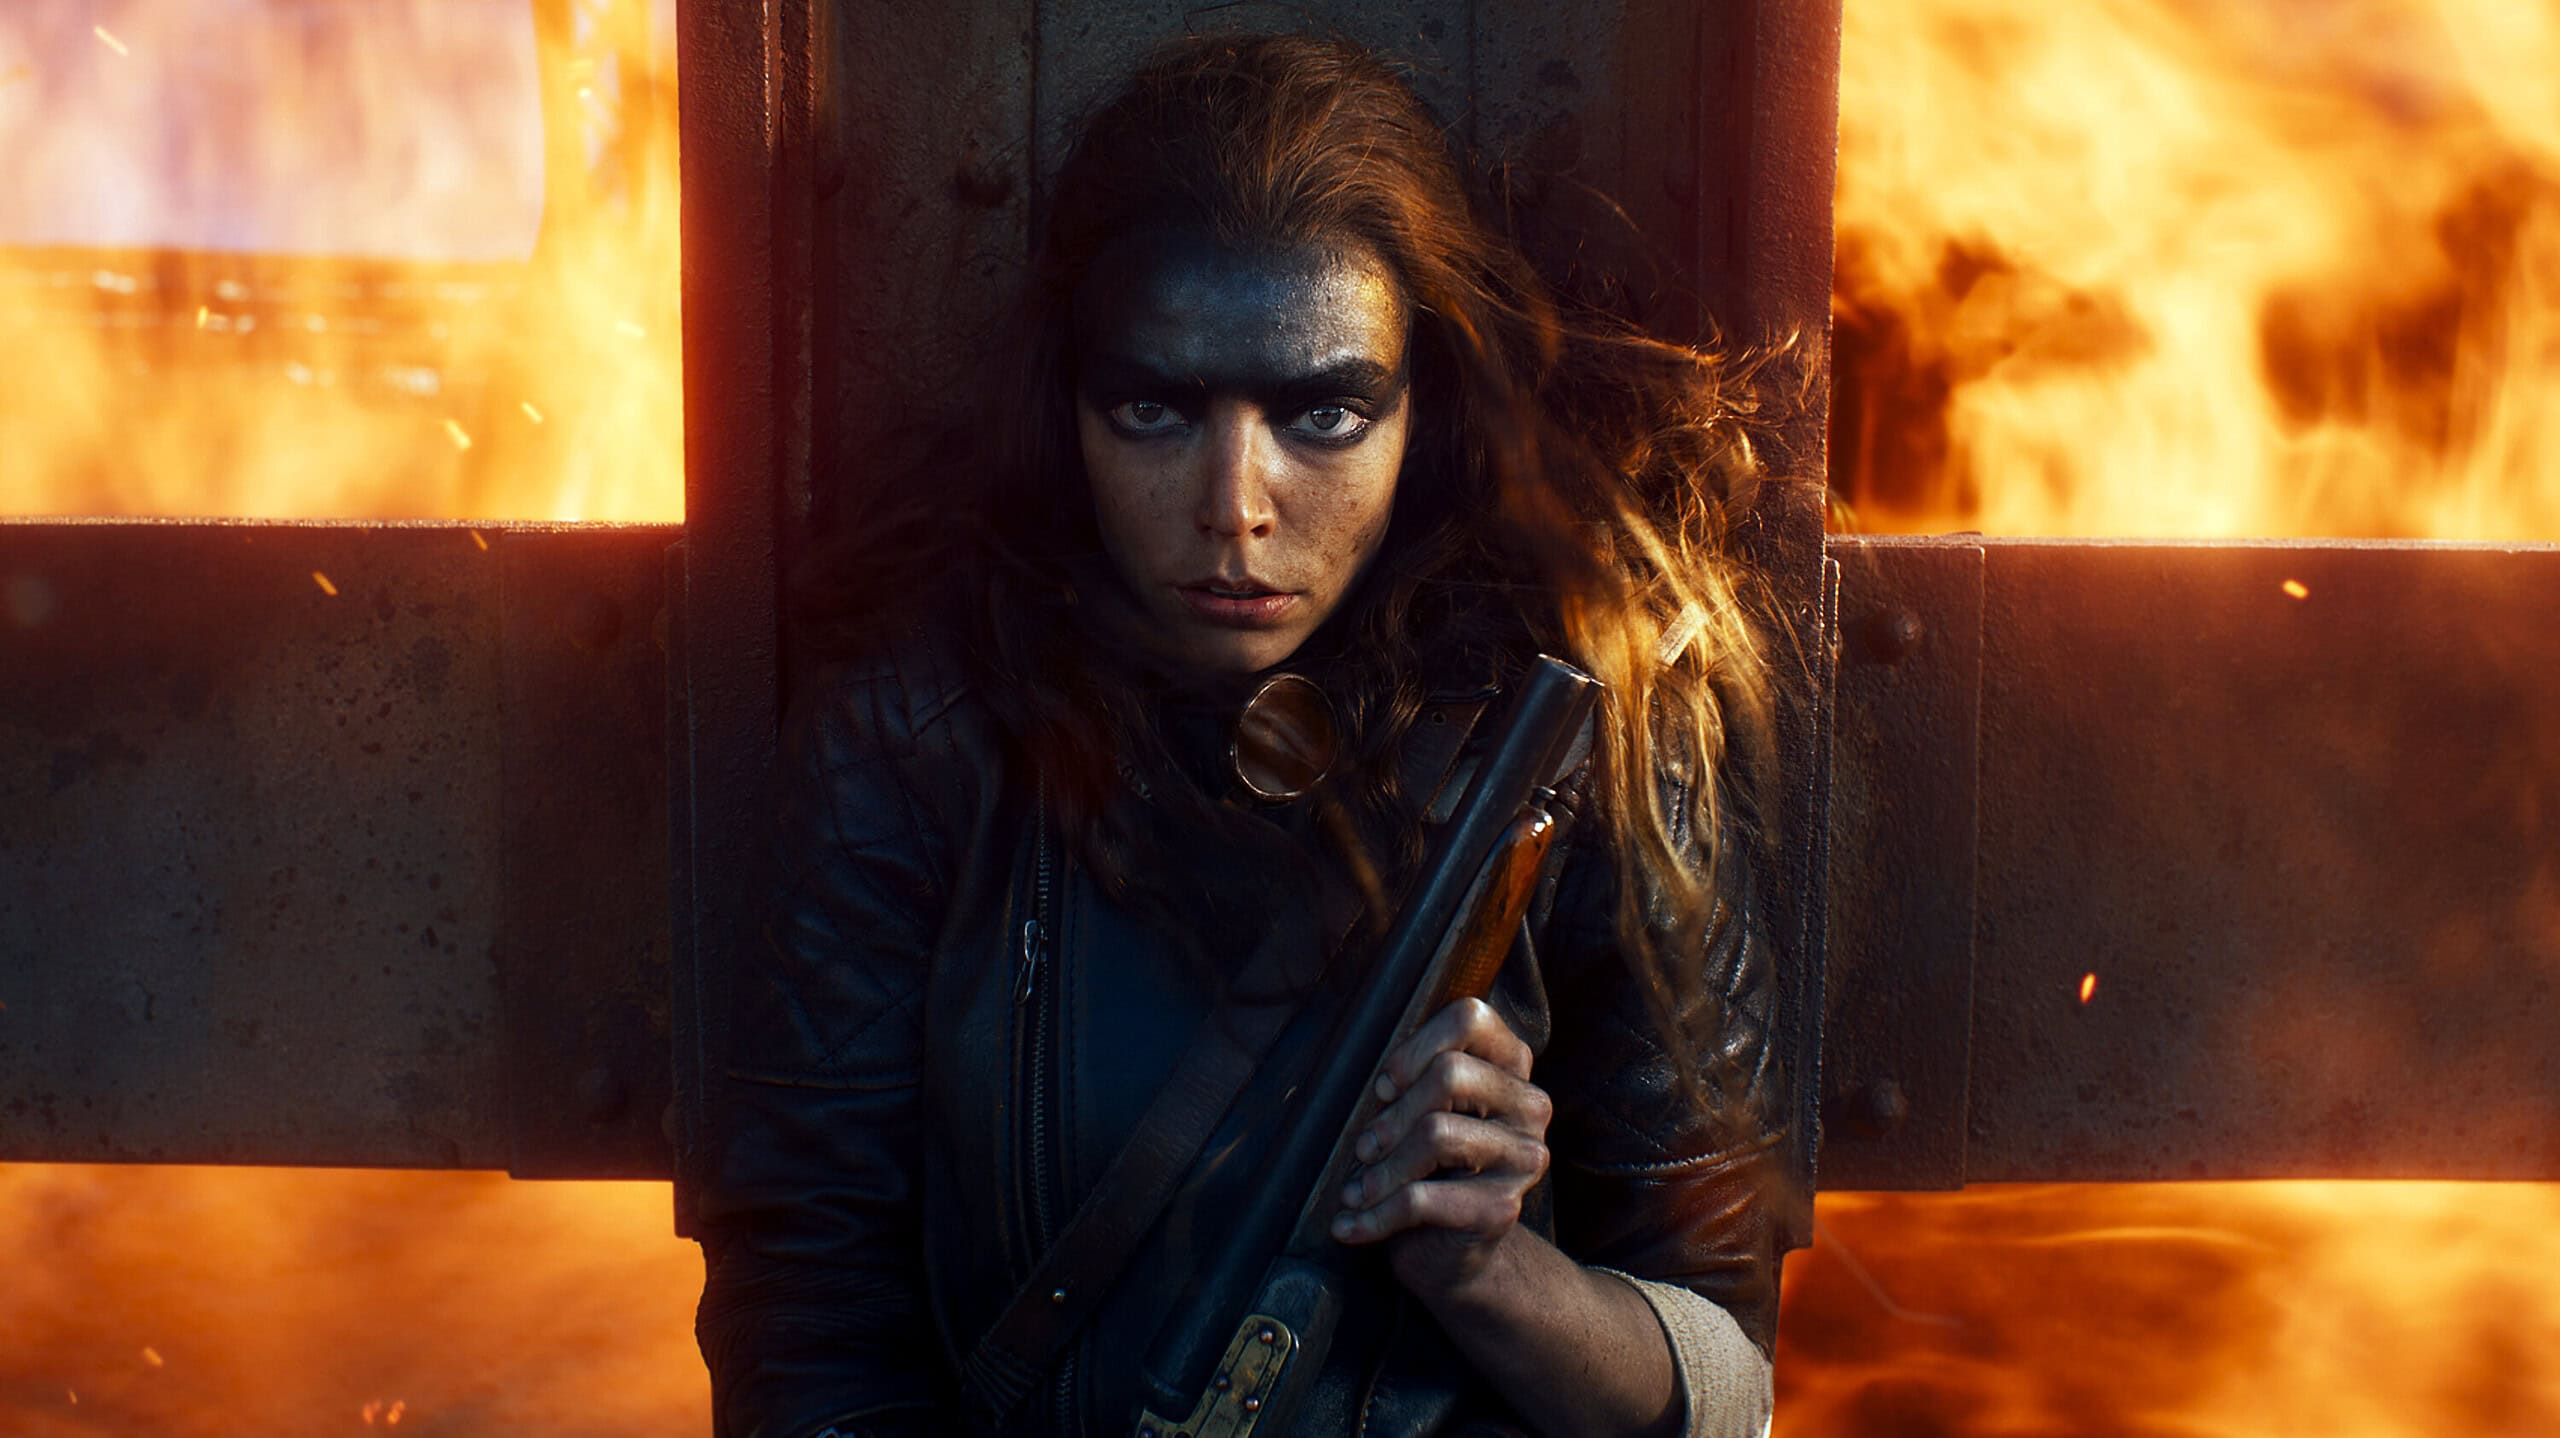 Top 7 Most Powerful Moments from Anya Taylor-Joy in Mad Max Fury Road Prequel